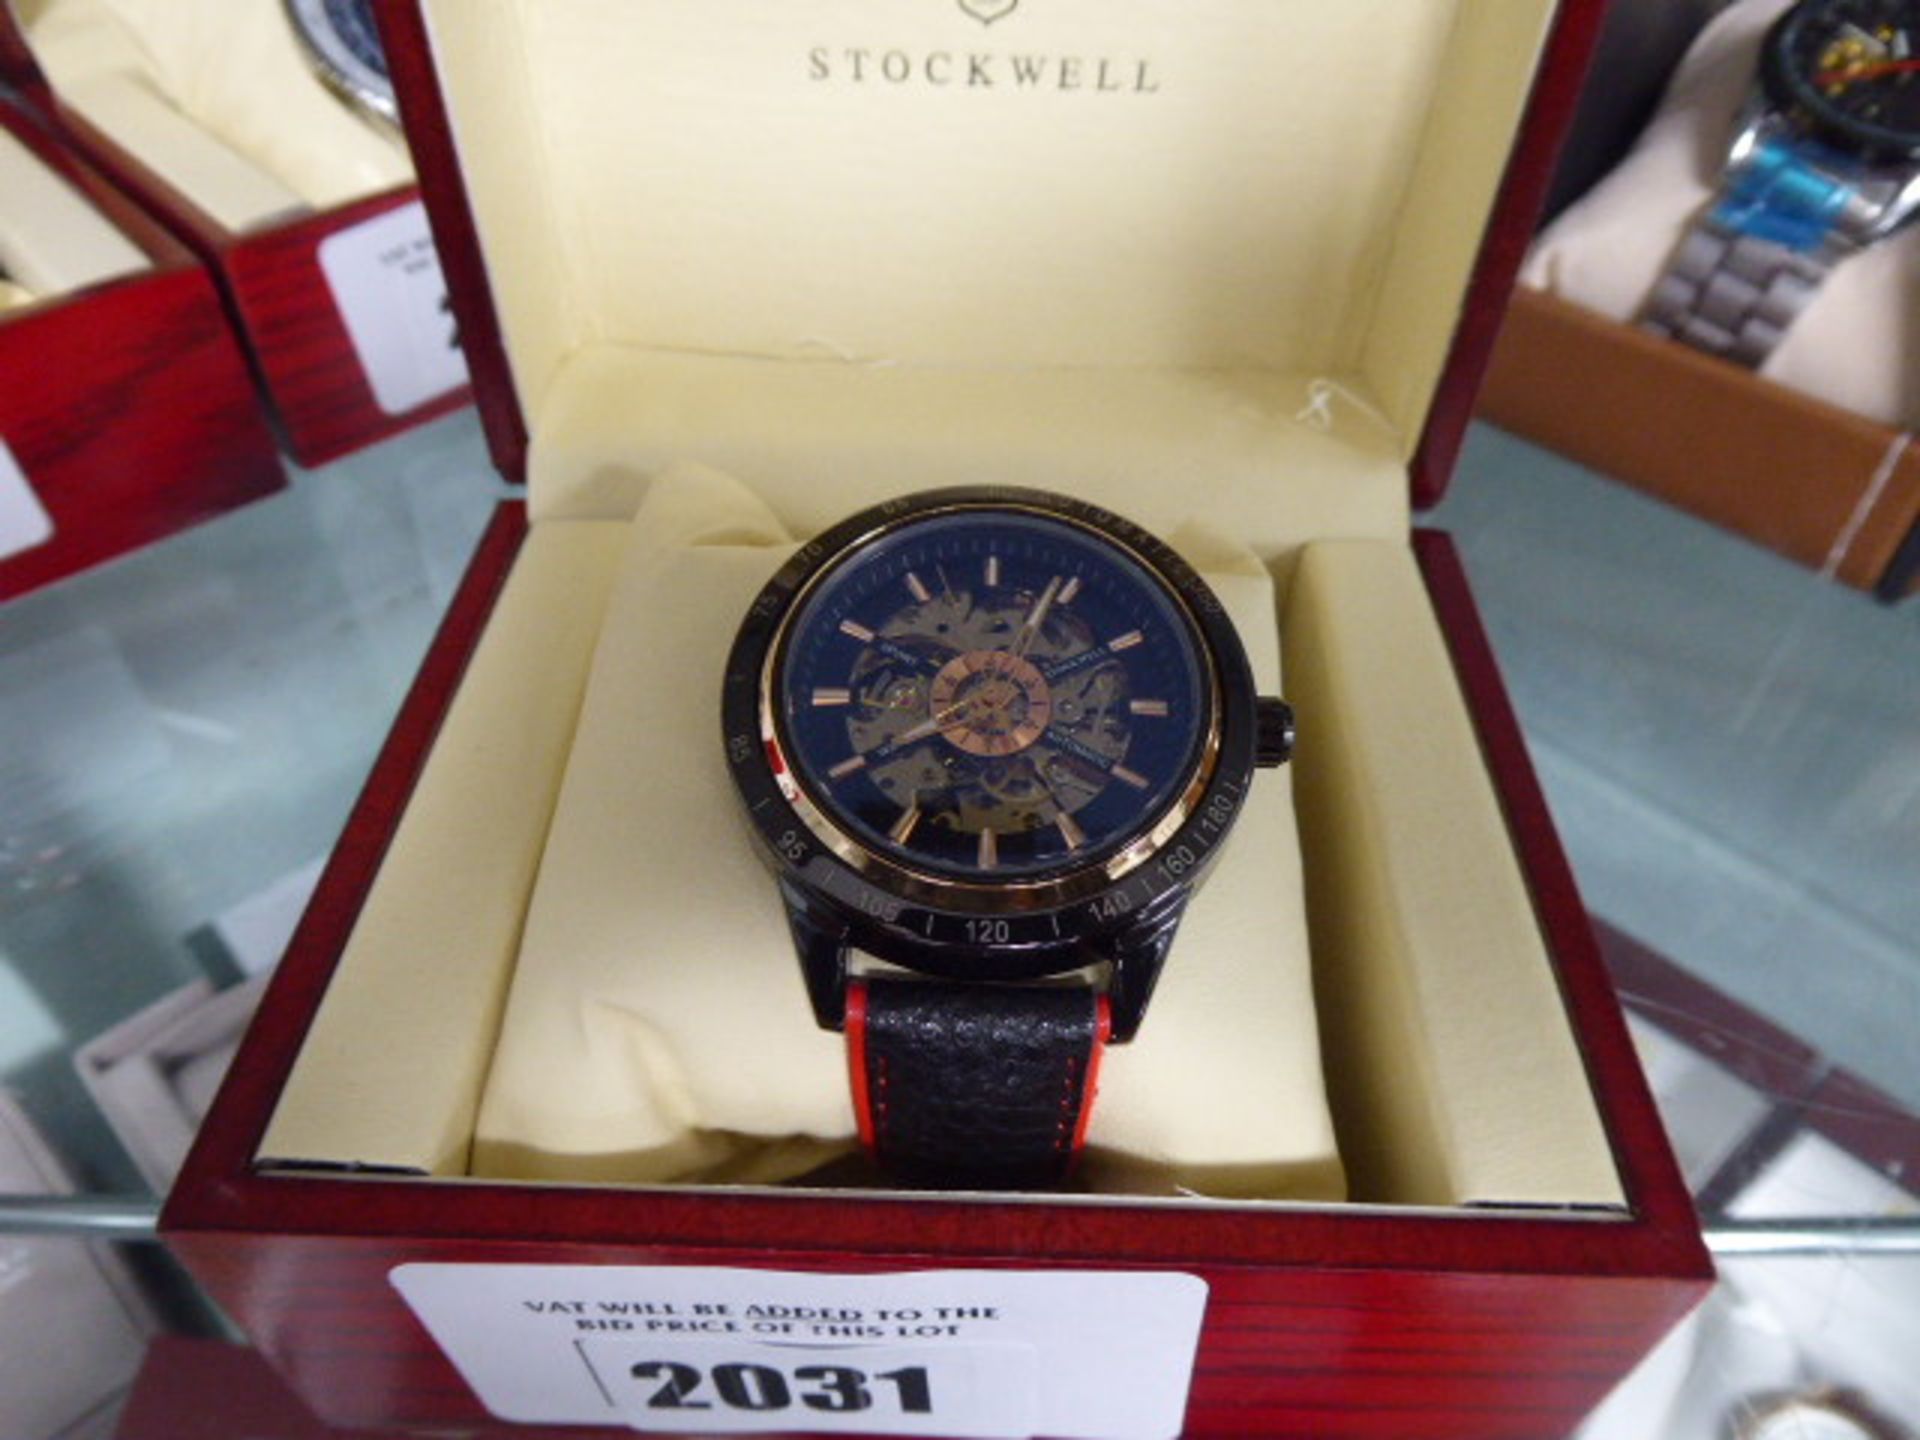 Stockwell Sport automatic open dial wristwatch with black leather strap and box